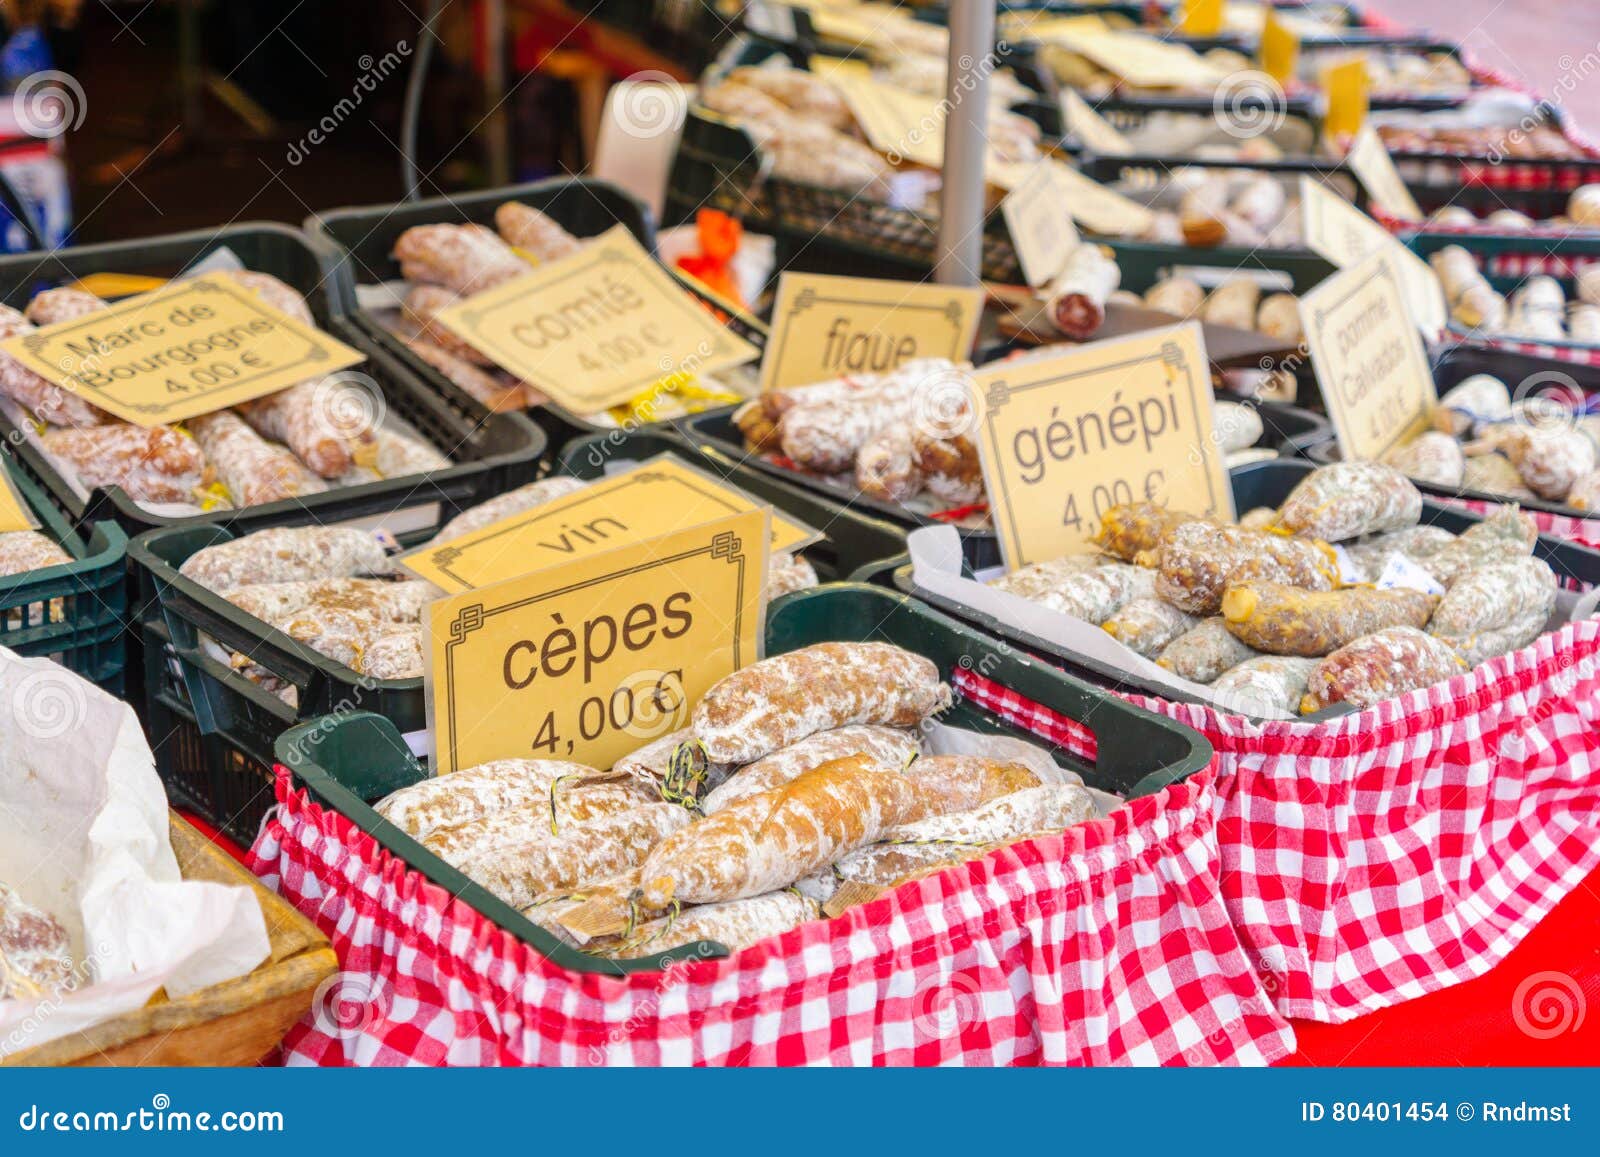 Sausages on in a French Market Stock Photo Image of dijon, green: 80401454